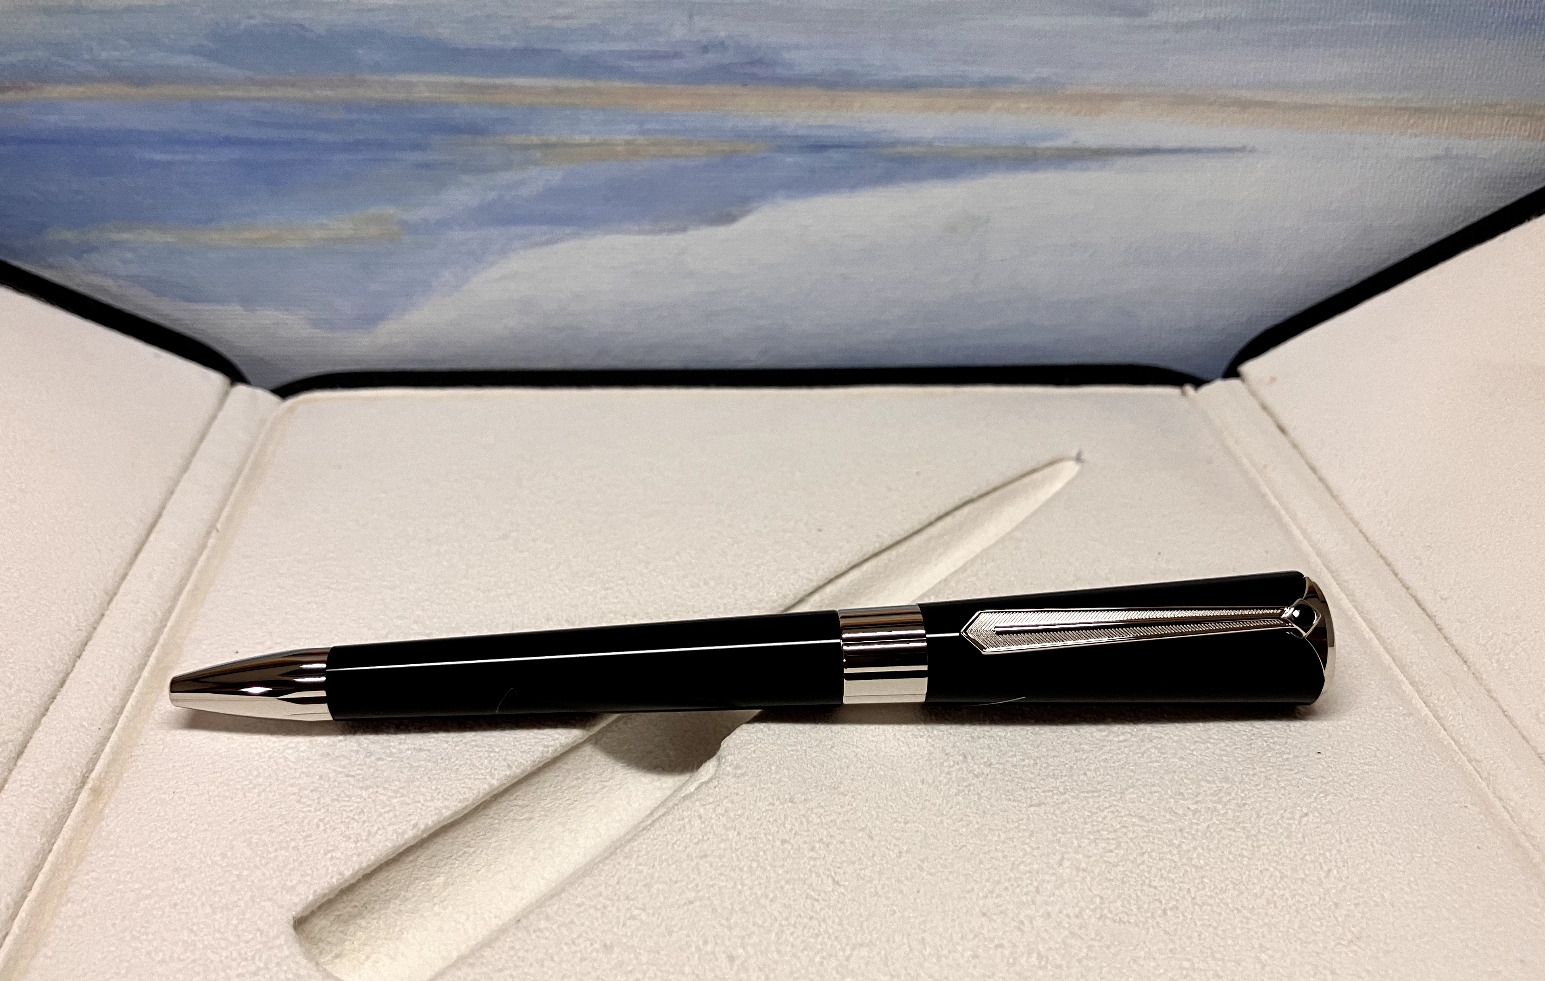 MONTBLANC Muses Marlene Dietrich Special Edition Ballpoint Pen